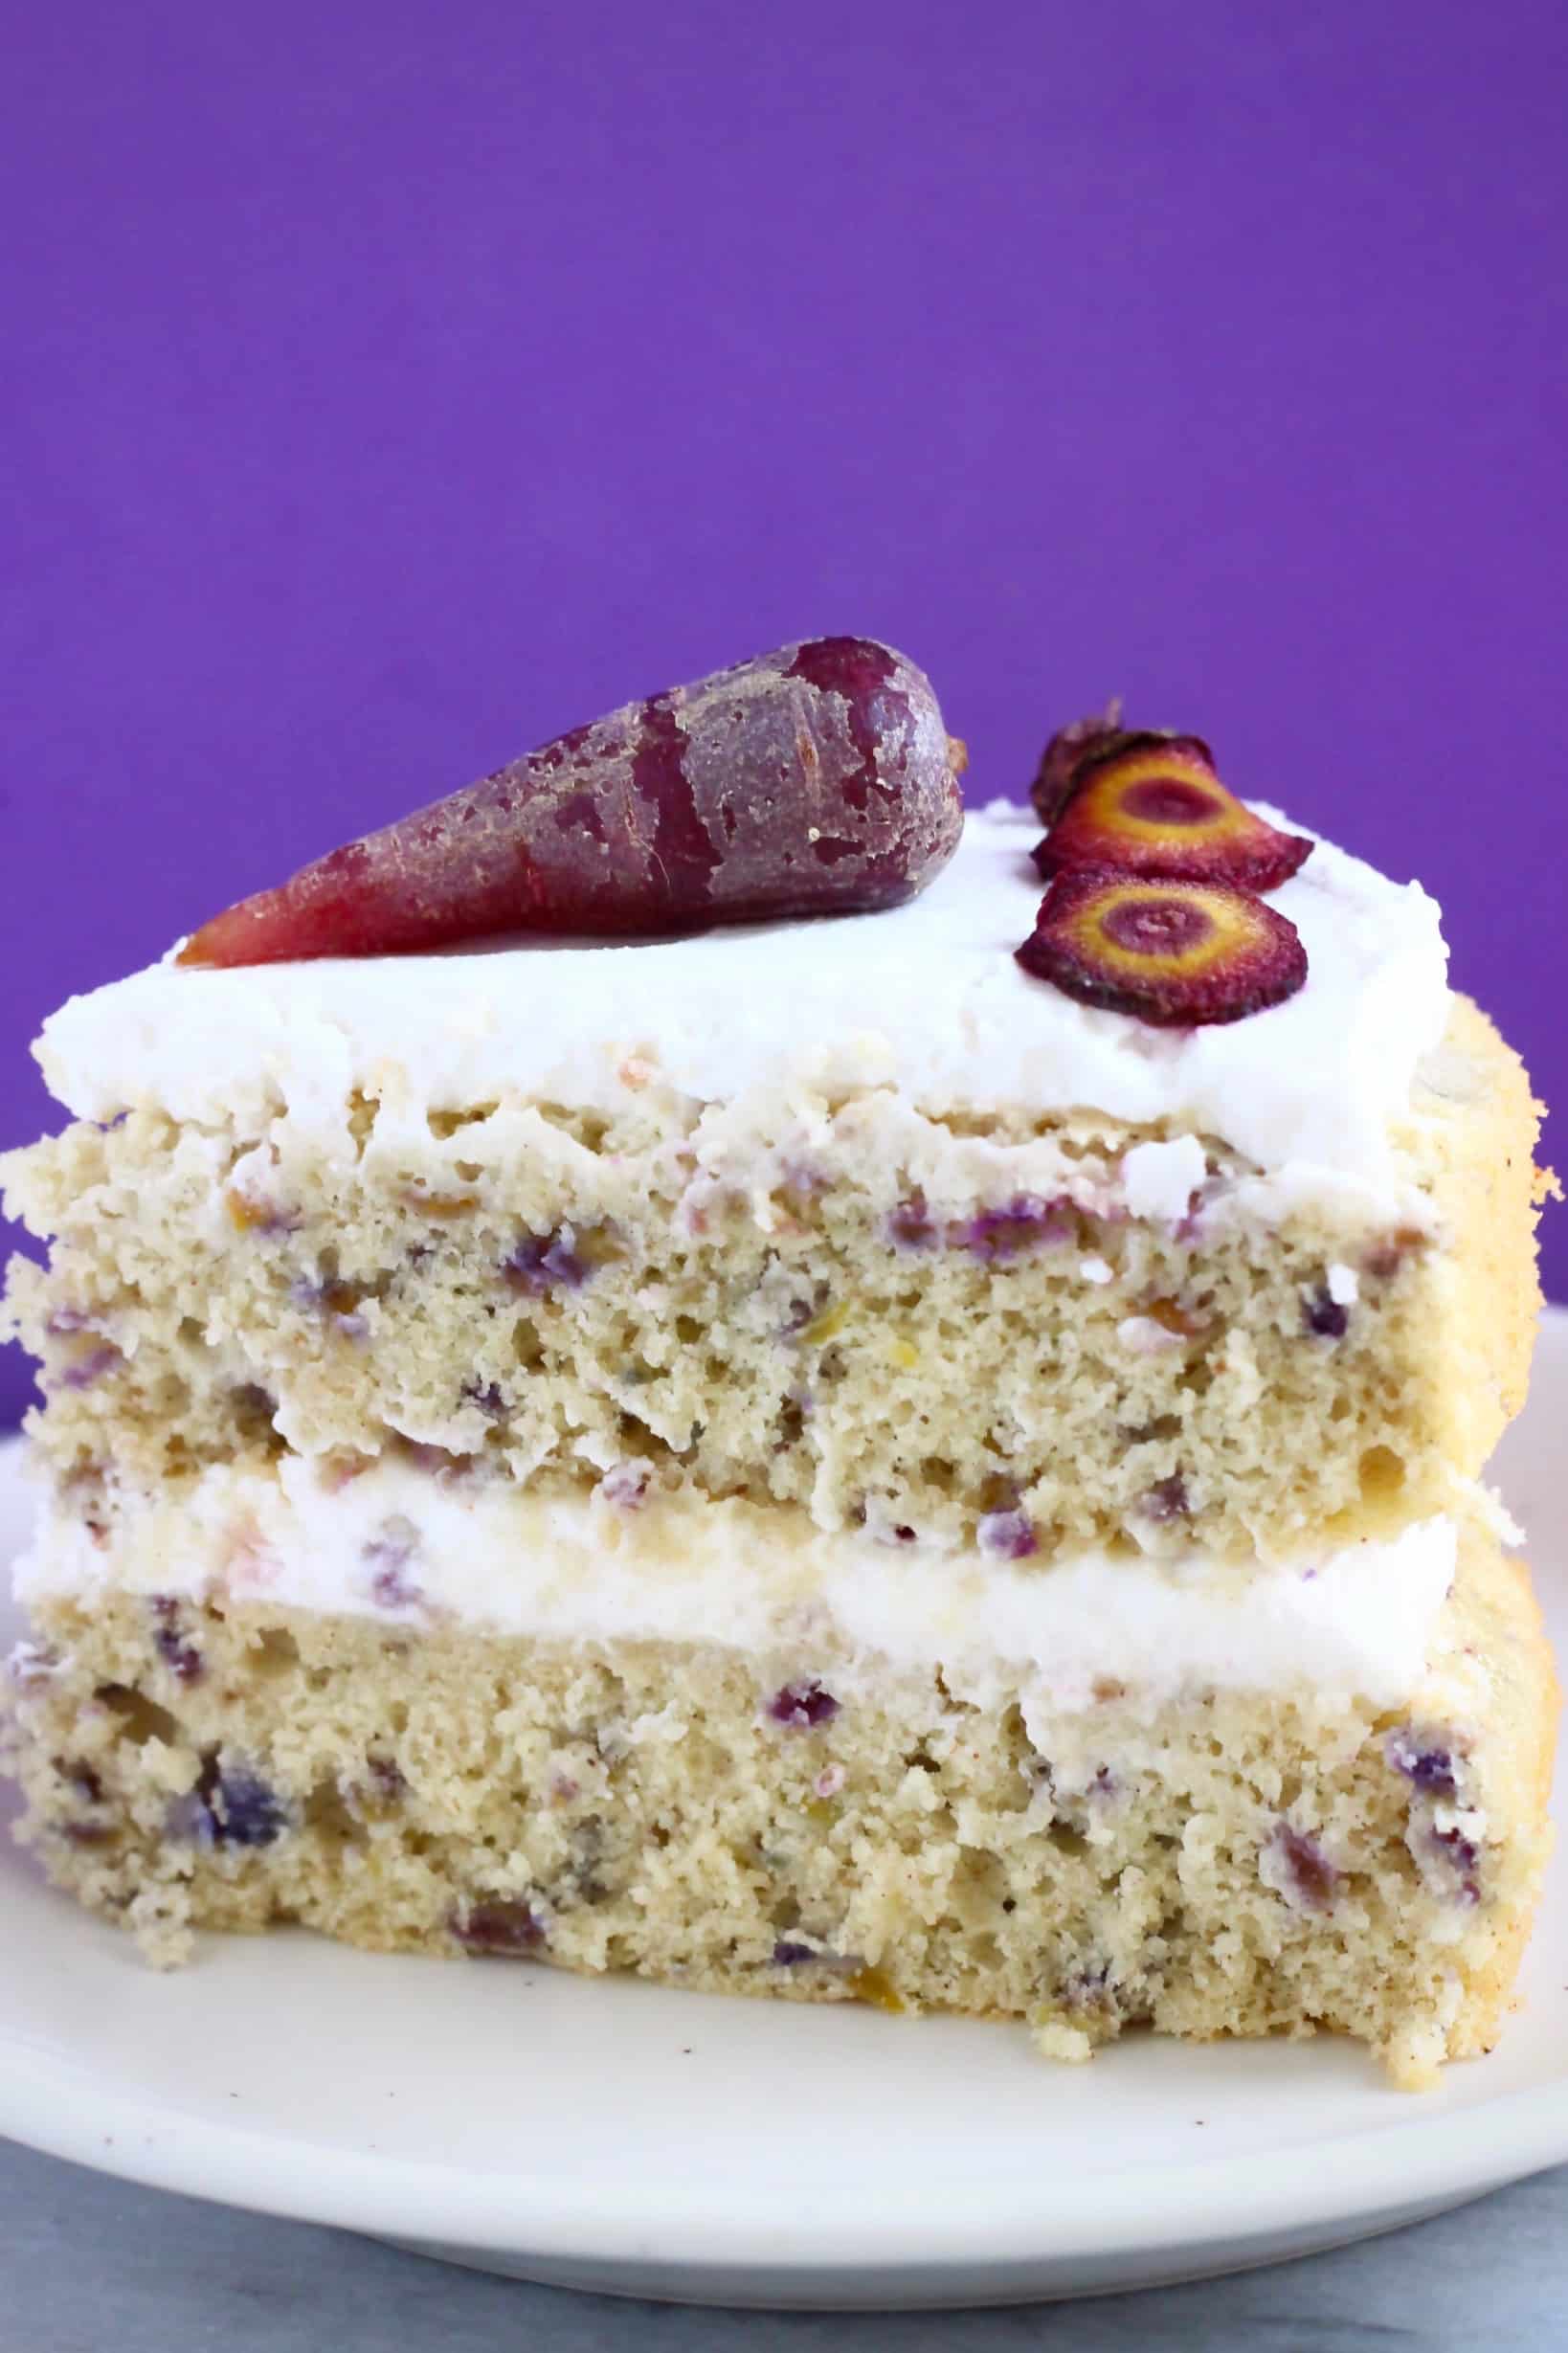 A slice of purple carrot cake on a white plate against a purple background